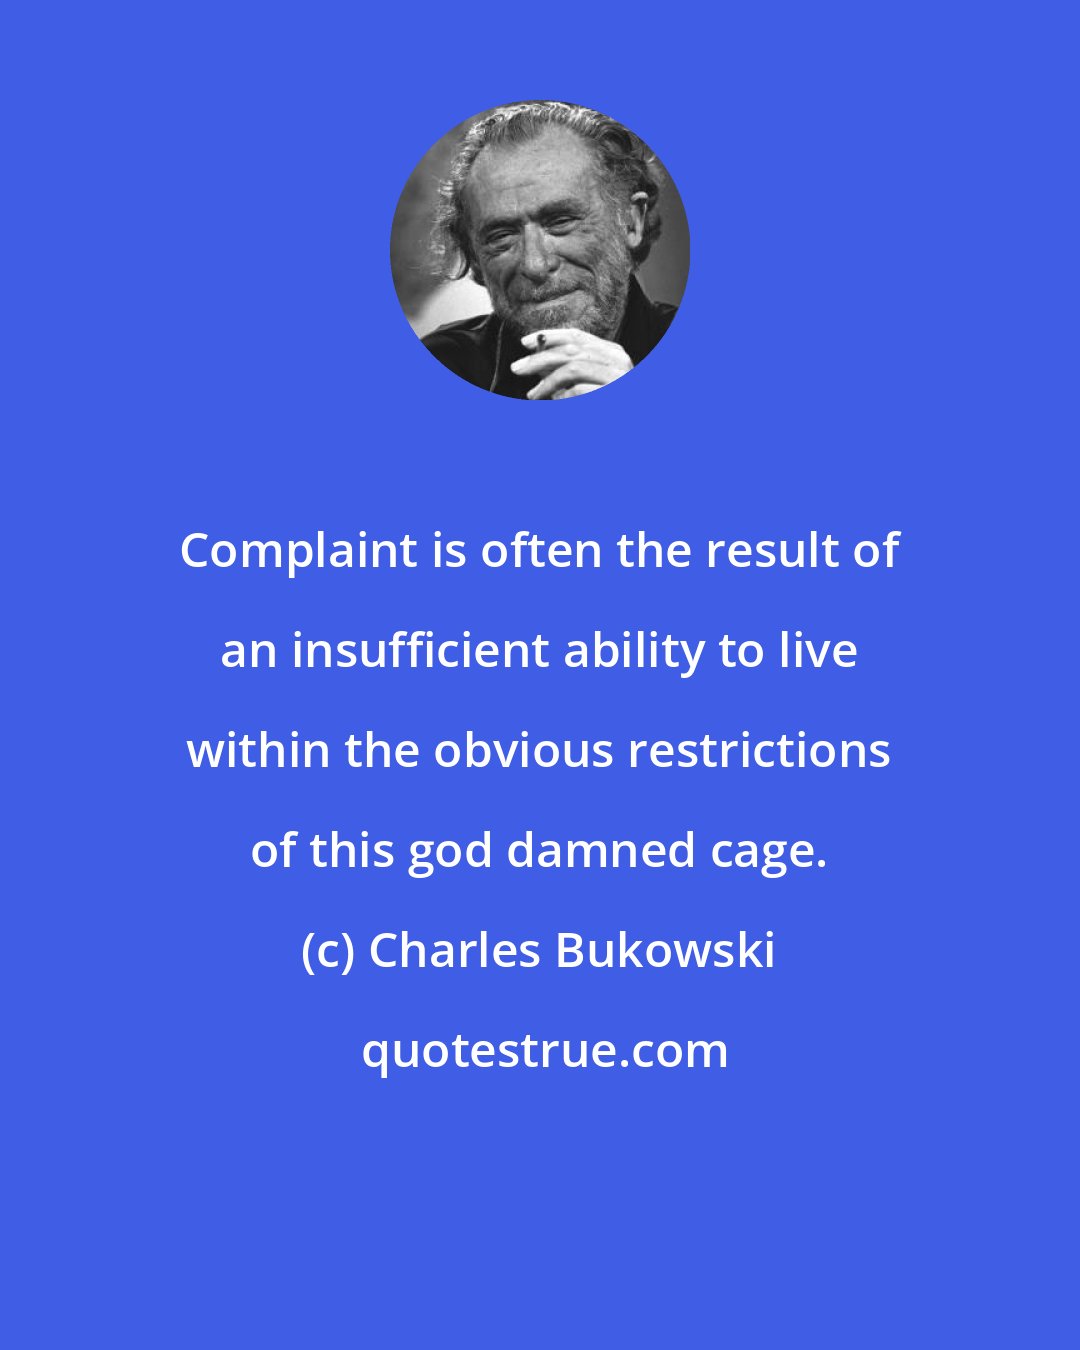 Charles Bukowski: Complaint is often the result of an insufficient ability to live within the obvious restrictions of this god damned cage.